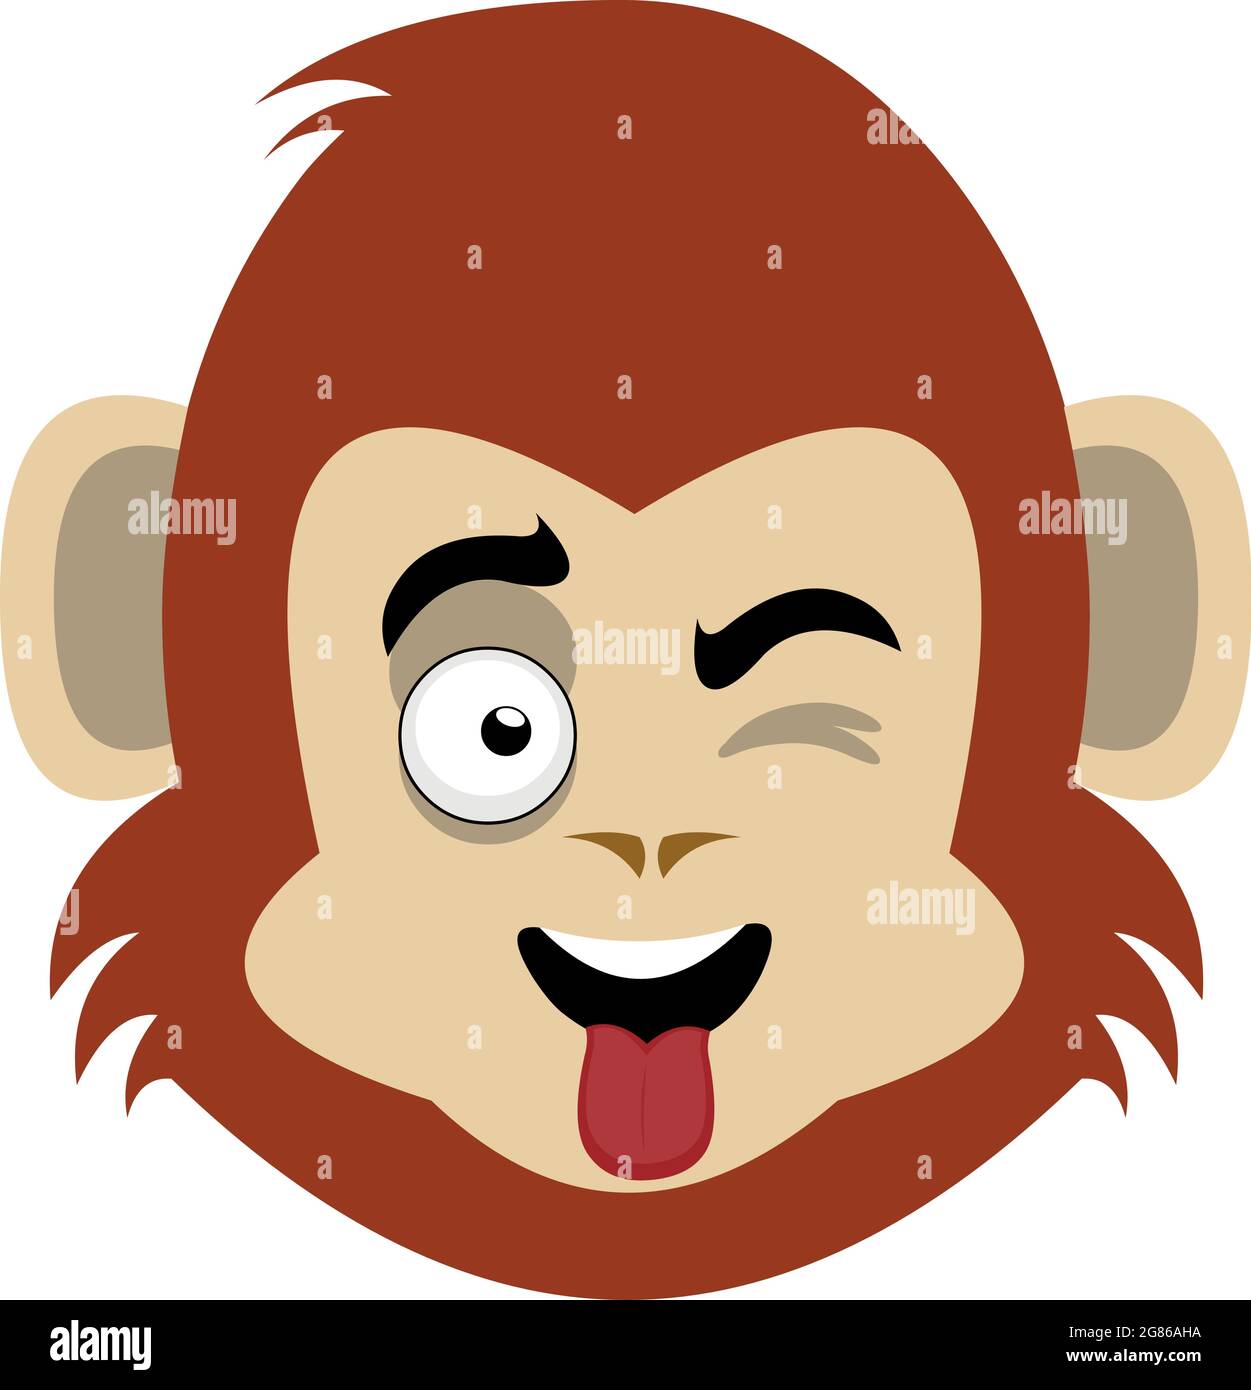 Vector emoticon illustration of the face of a cartoon monkey or chimpanzee winking and his tongue sticking out Stock Vector